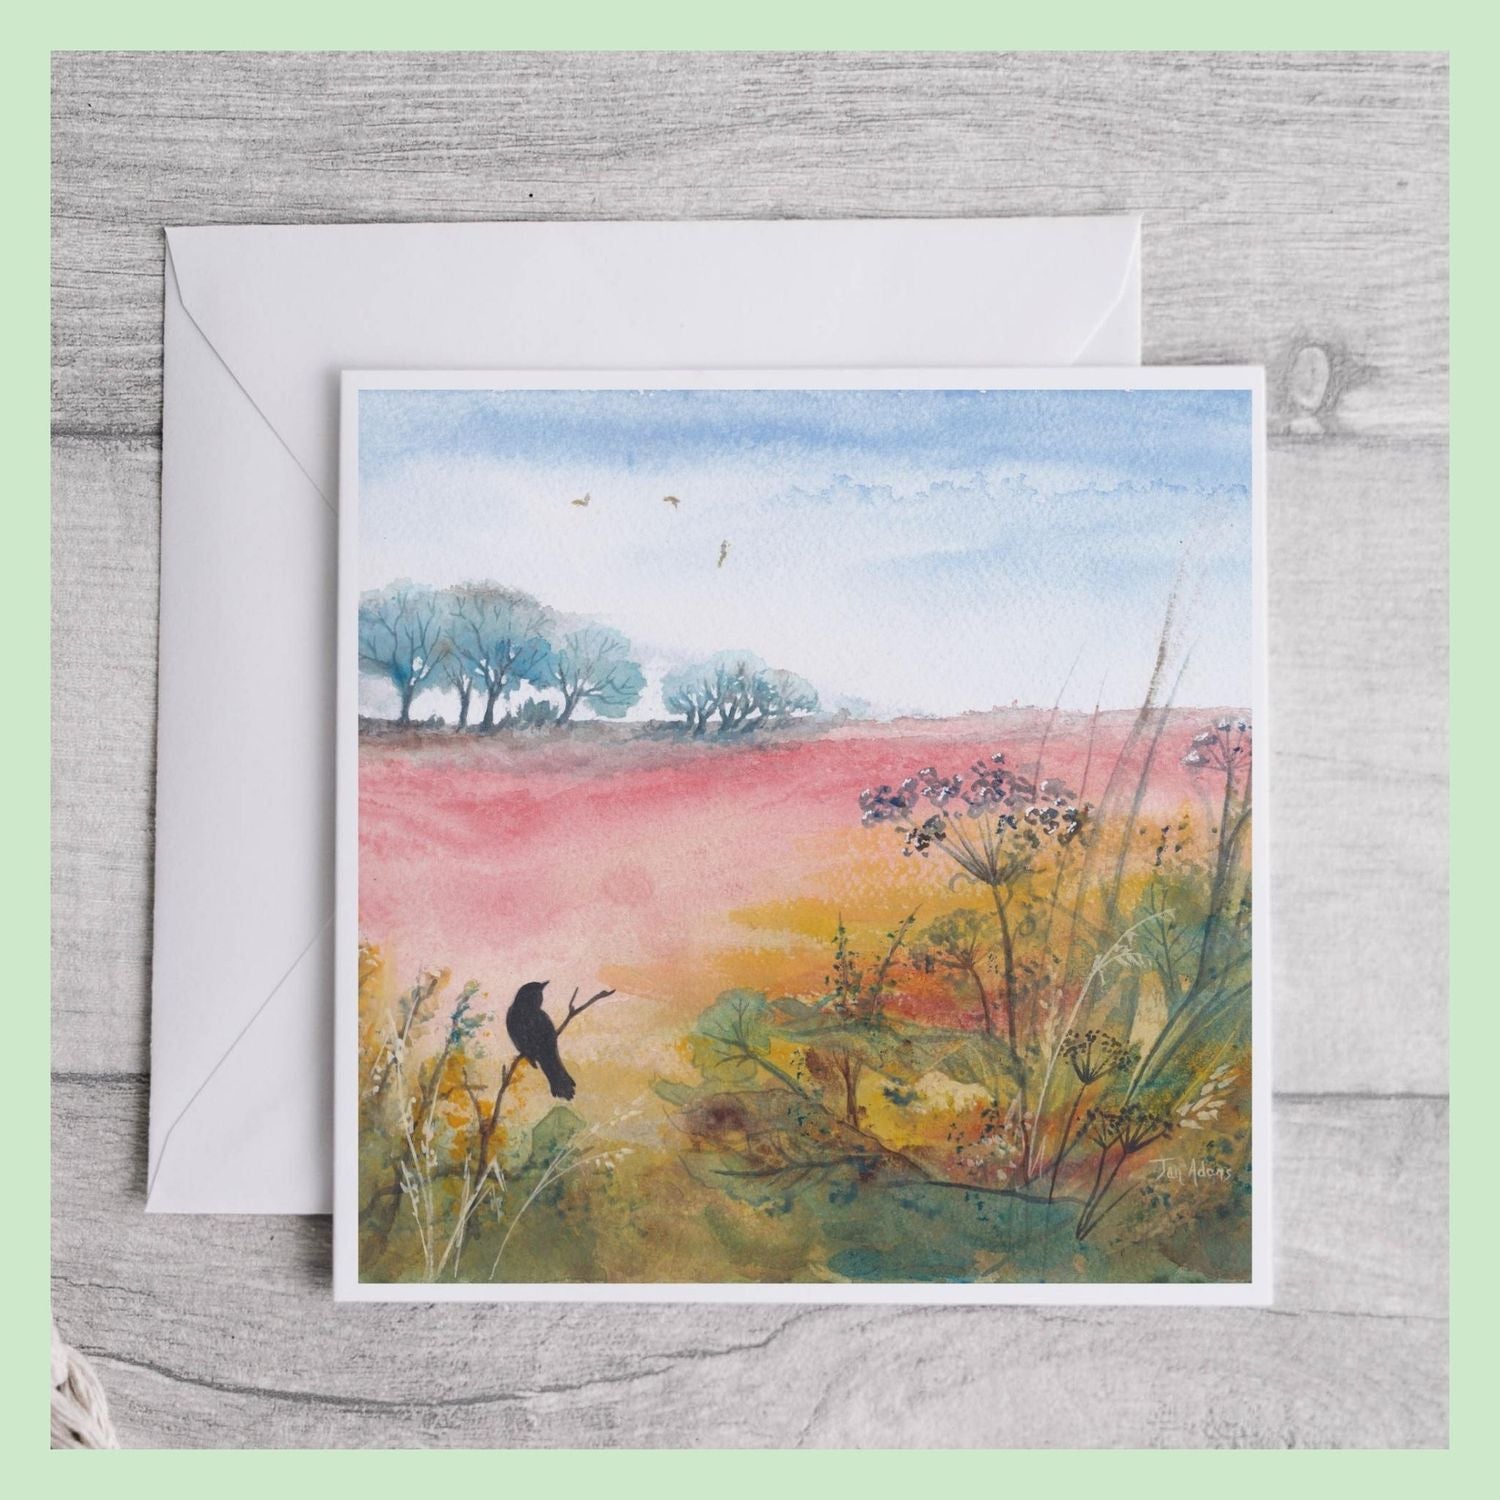 Greetings card with blackbird silhouette